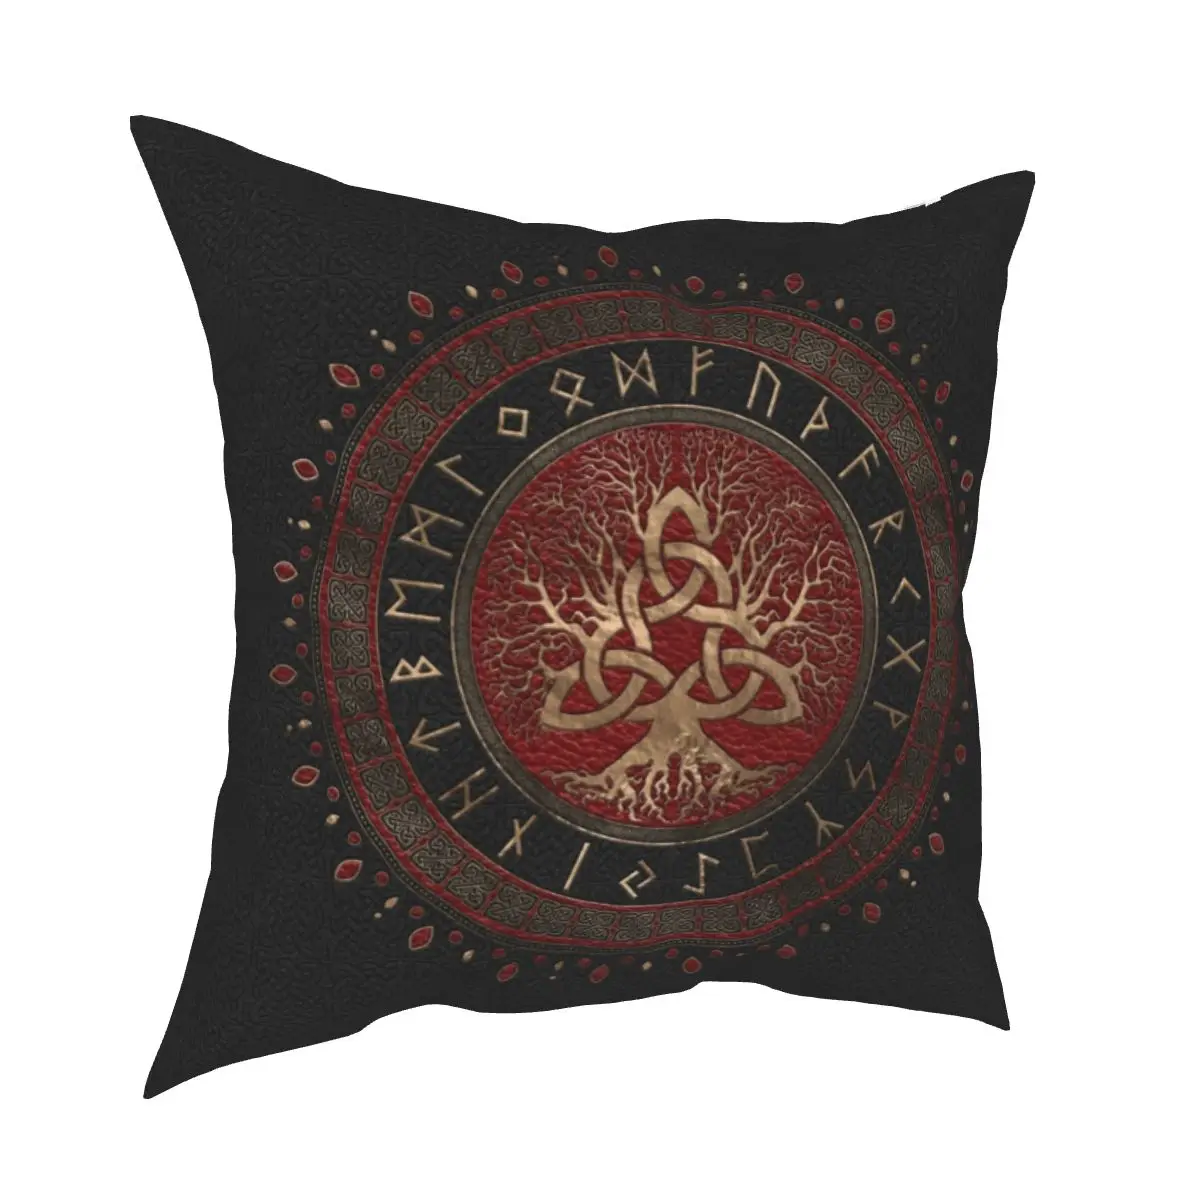 

Tree Of Life With Triquetra Viking Runes Pillowcase Cushion Cover Decorative Vikings Symbol Pillow Case Cover Home 45X45cm